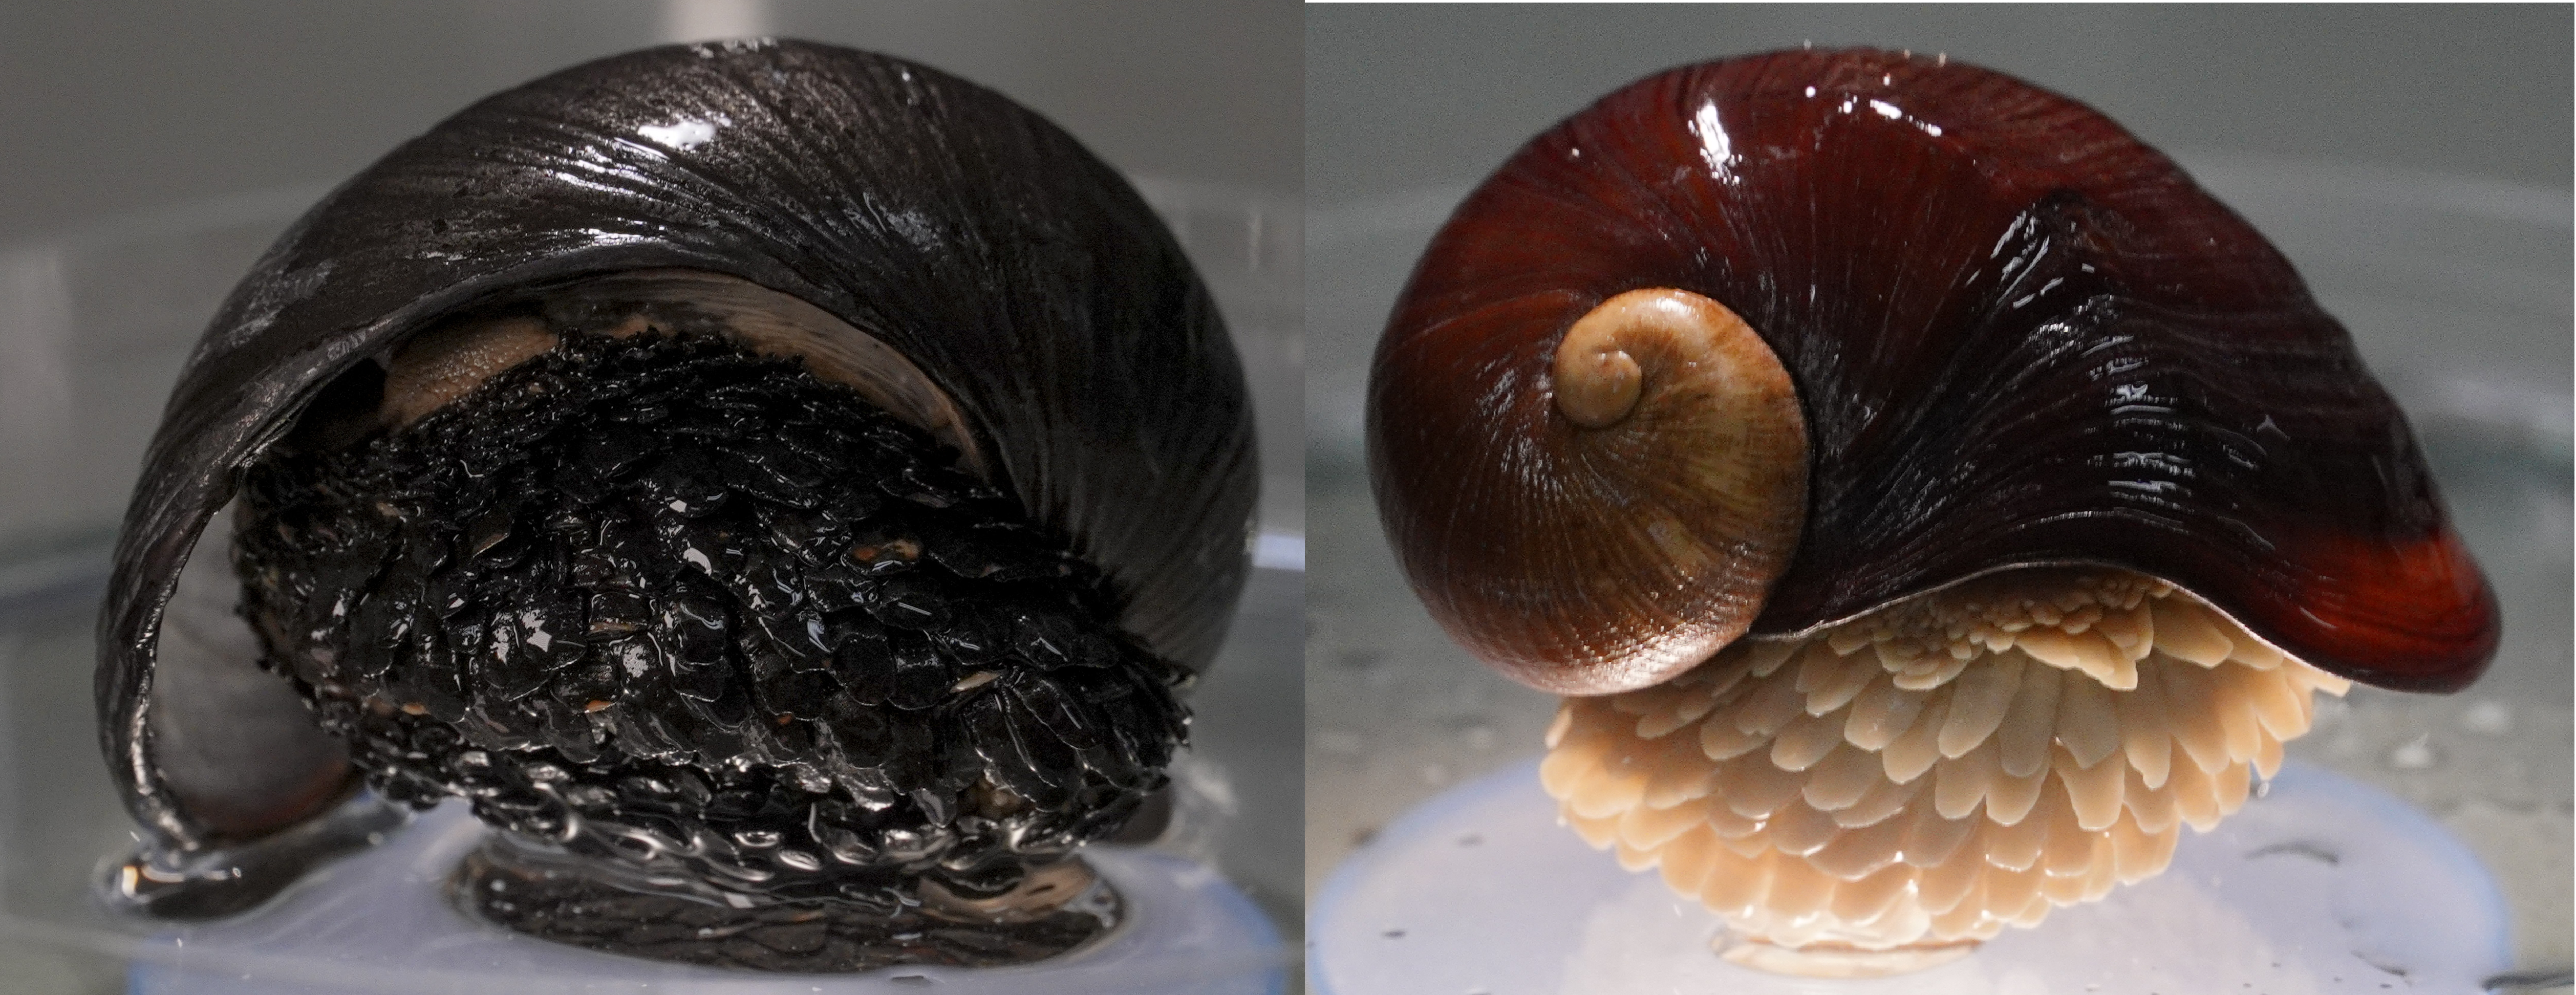 The Scaly-foot Snail on the left has incorporated the iron from the hydrothermal vent while the one on the right has not. 